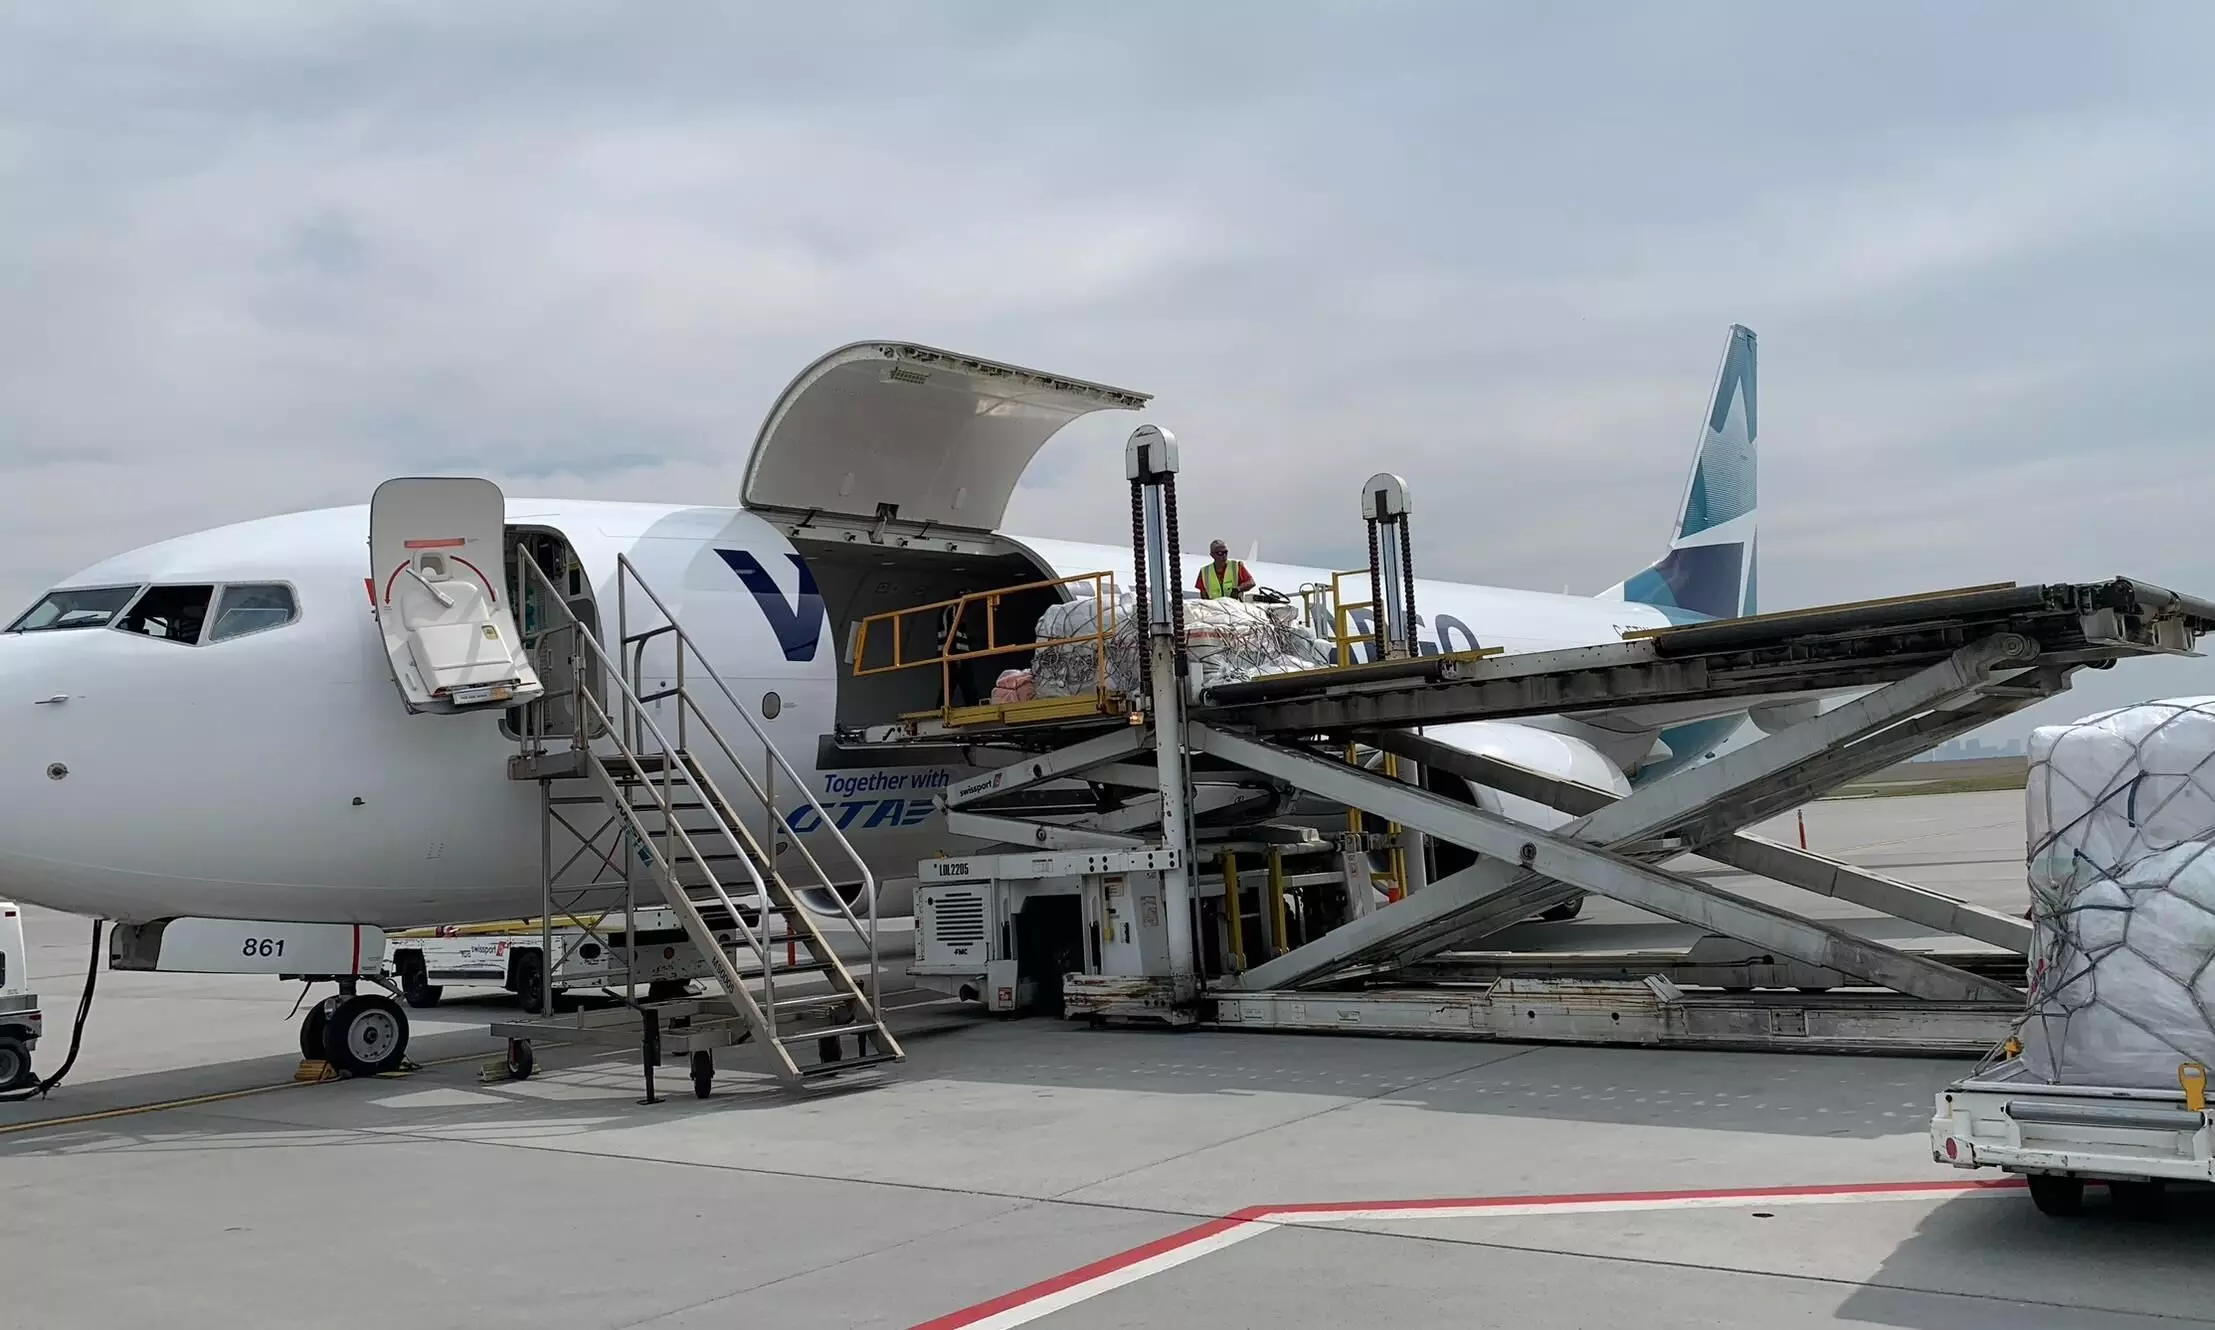 Cargo loading at Calgary International Airport (YYC) before the freighter’s departure to Vancouver International Airport (YVR)